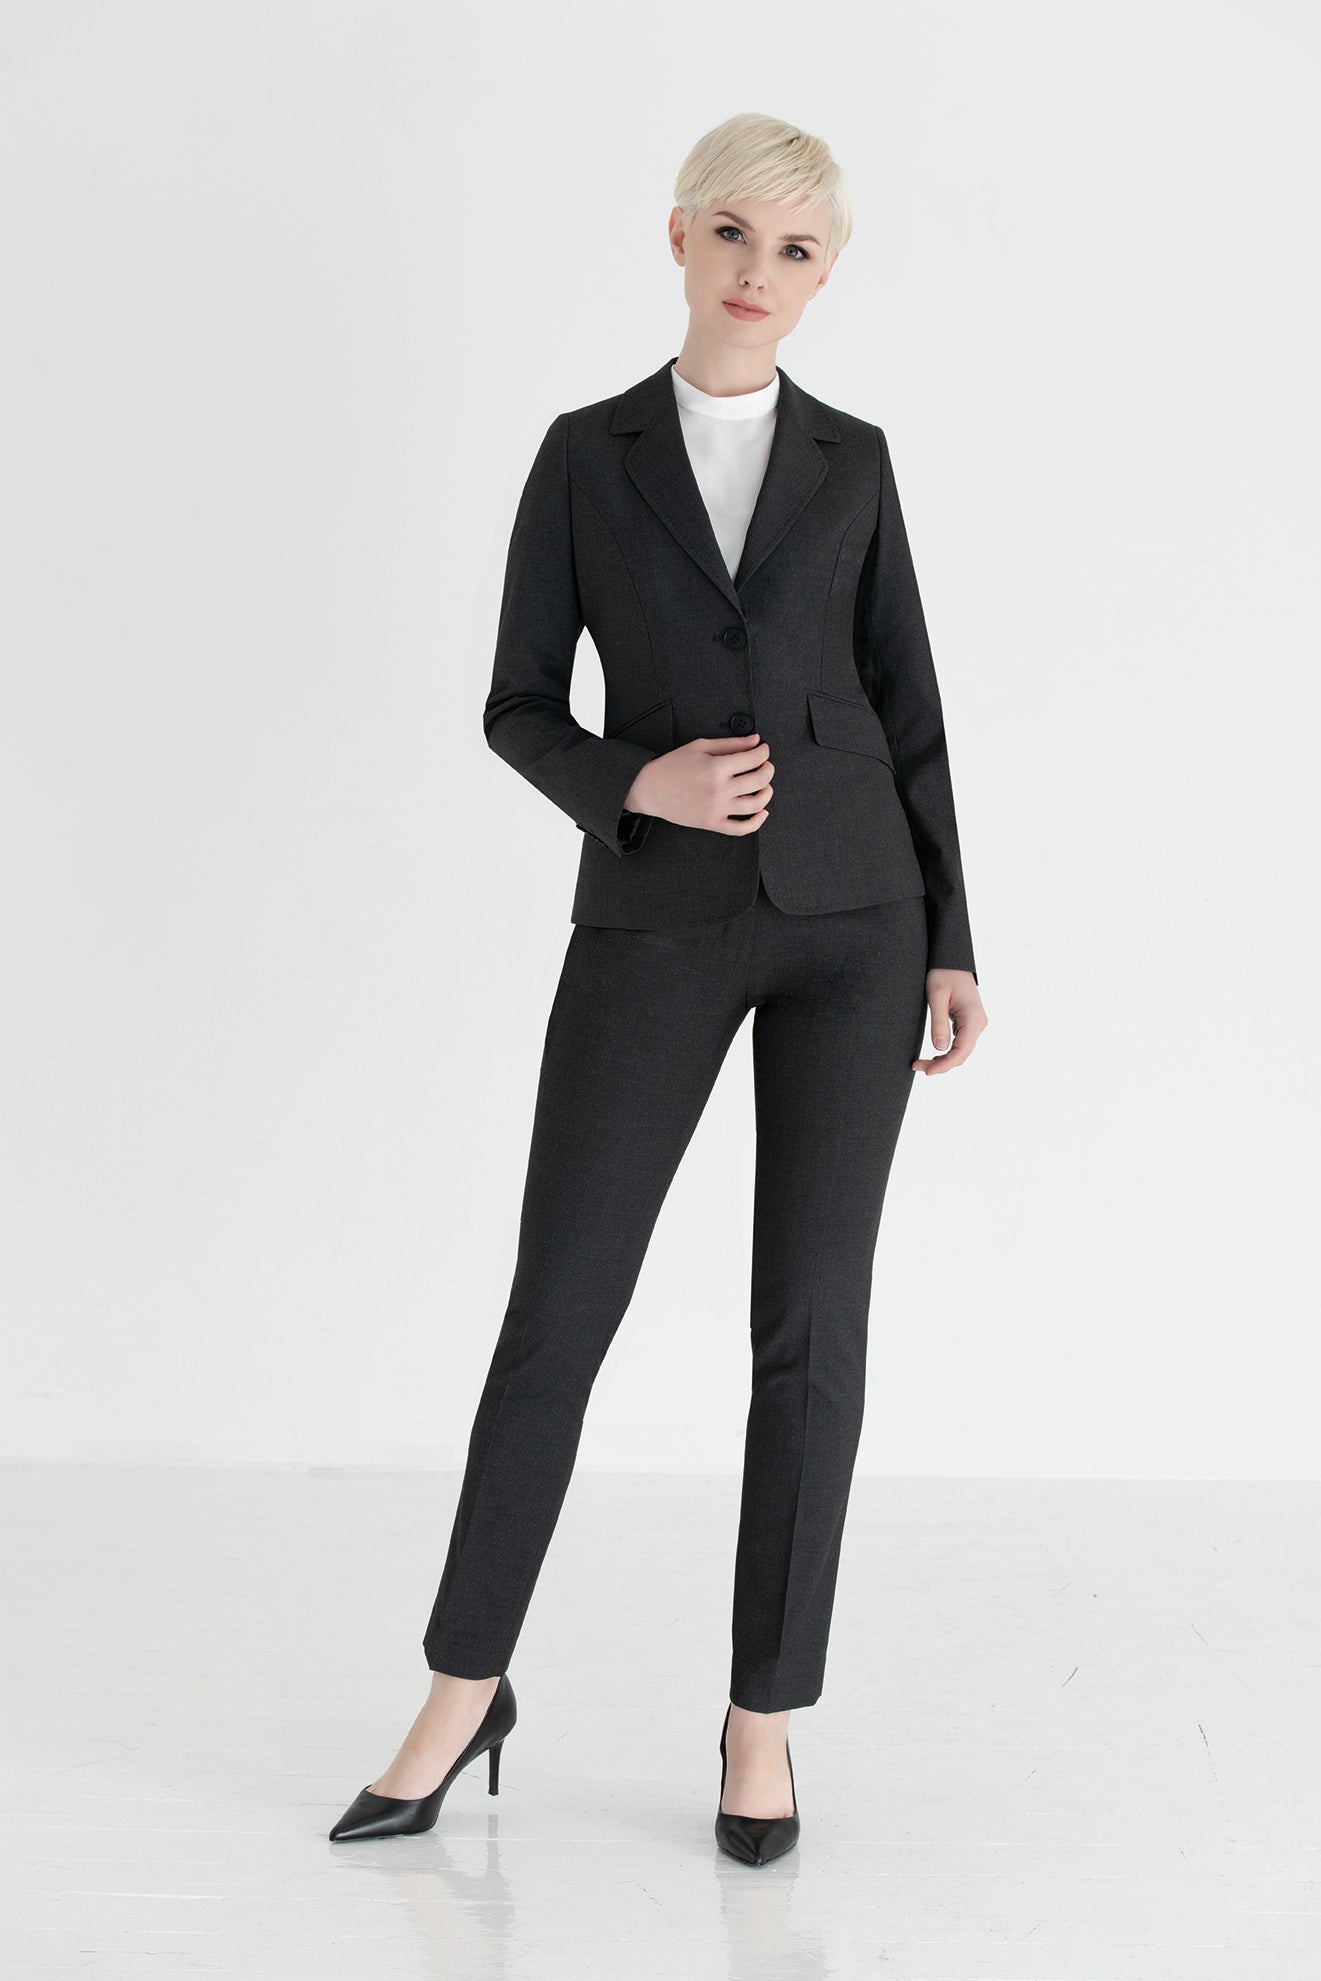 Custom Black Mother Of The Bride Lulus Black Jumpsuit With V Neck And Pants  2021 Wedding Guest Gowns And Long Sleeves From Lindaxu90, $84.89 |  DHgate.Com